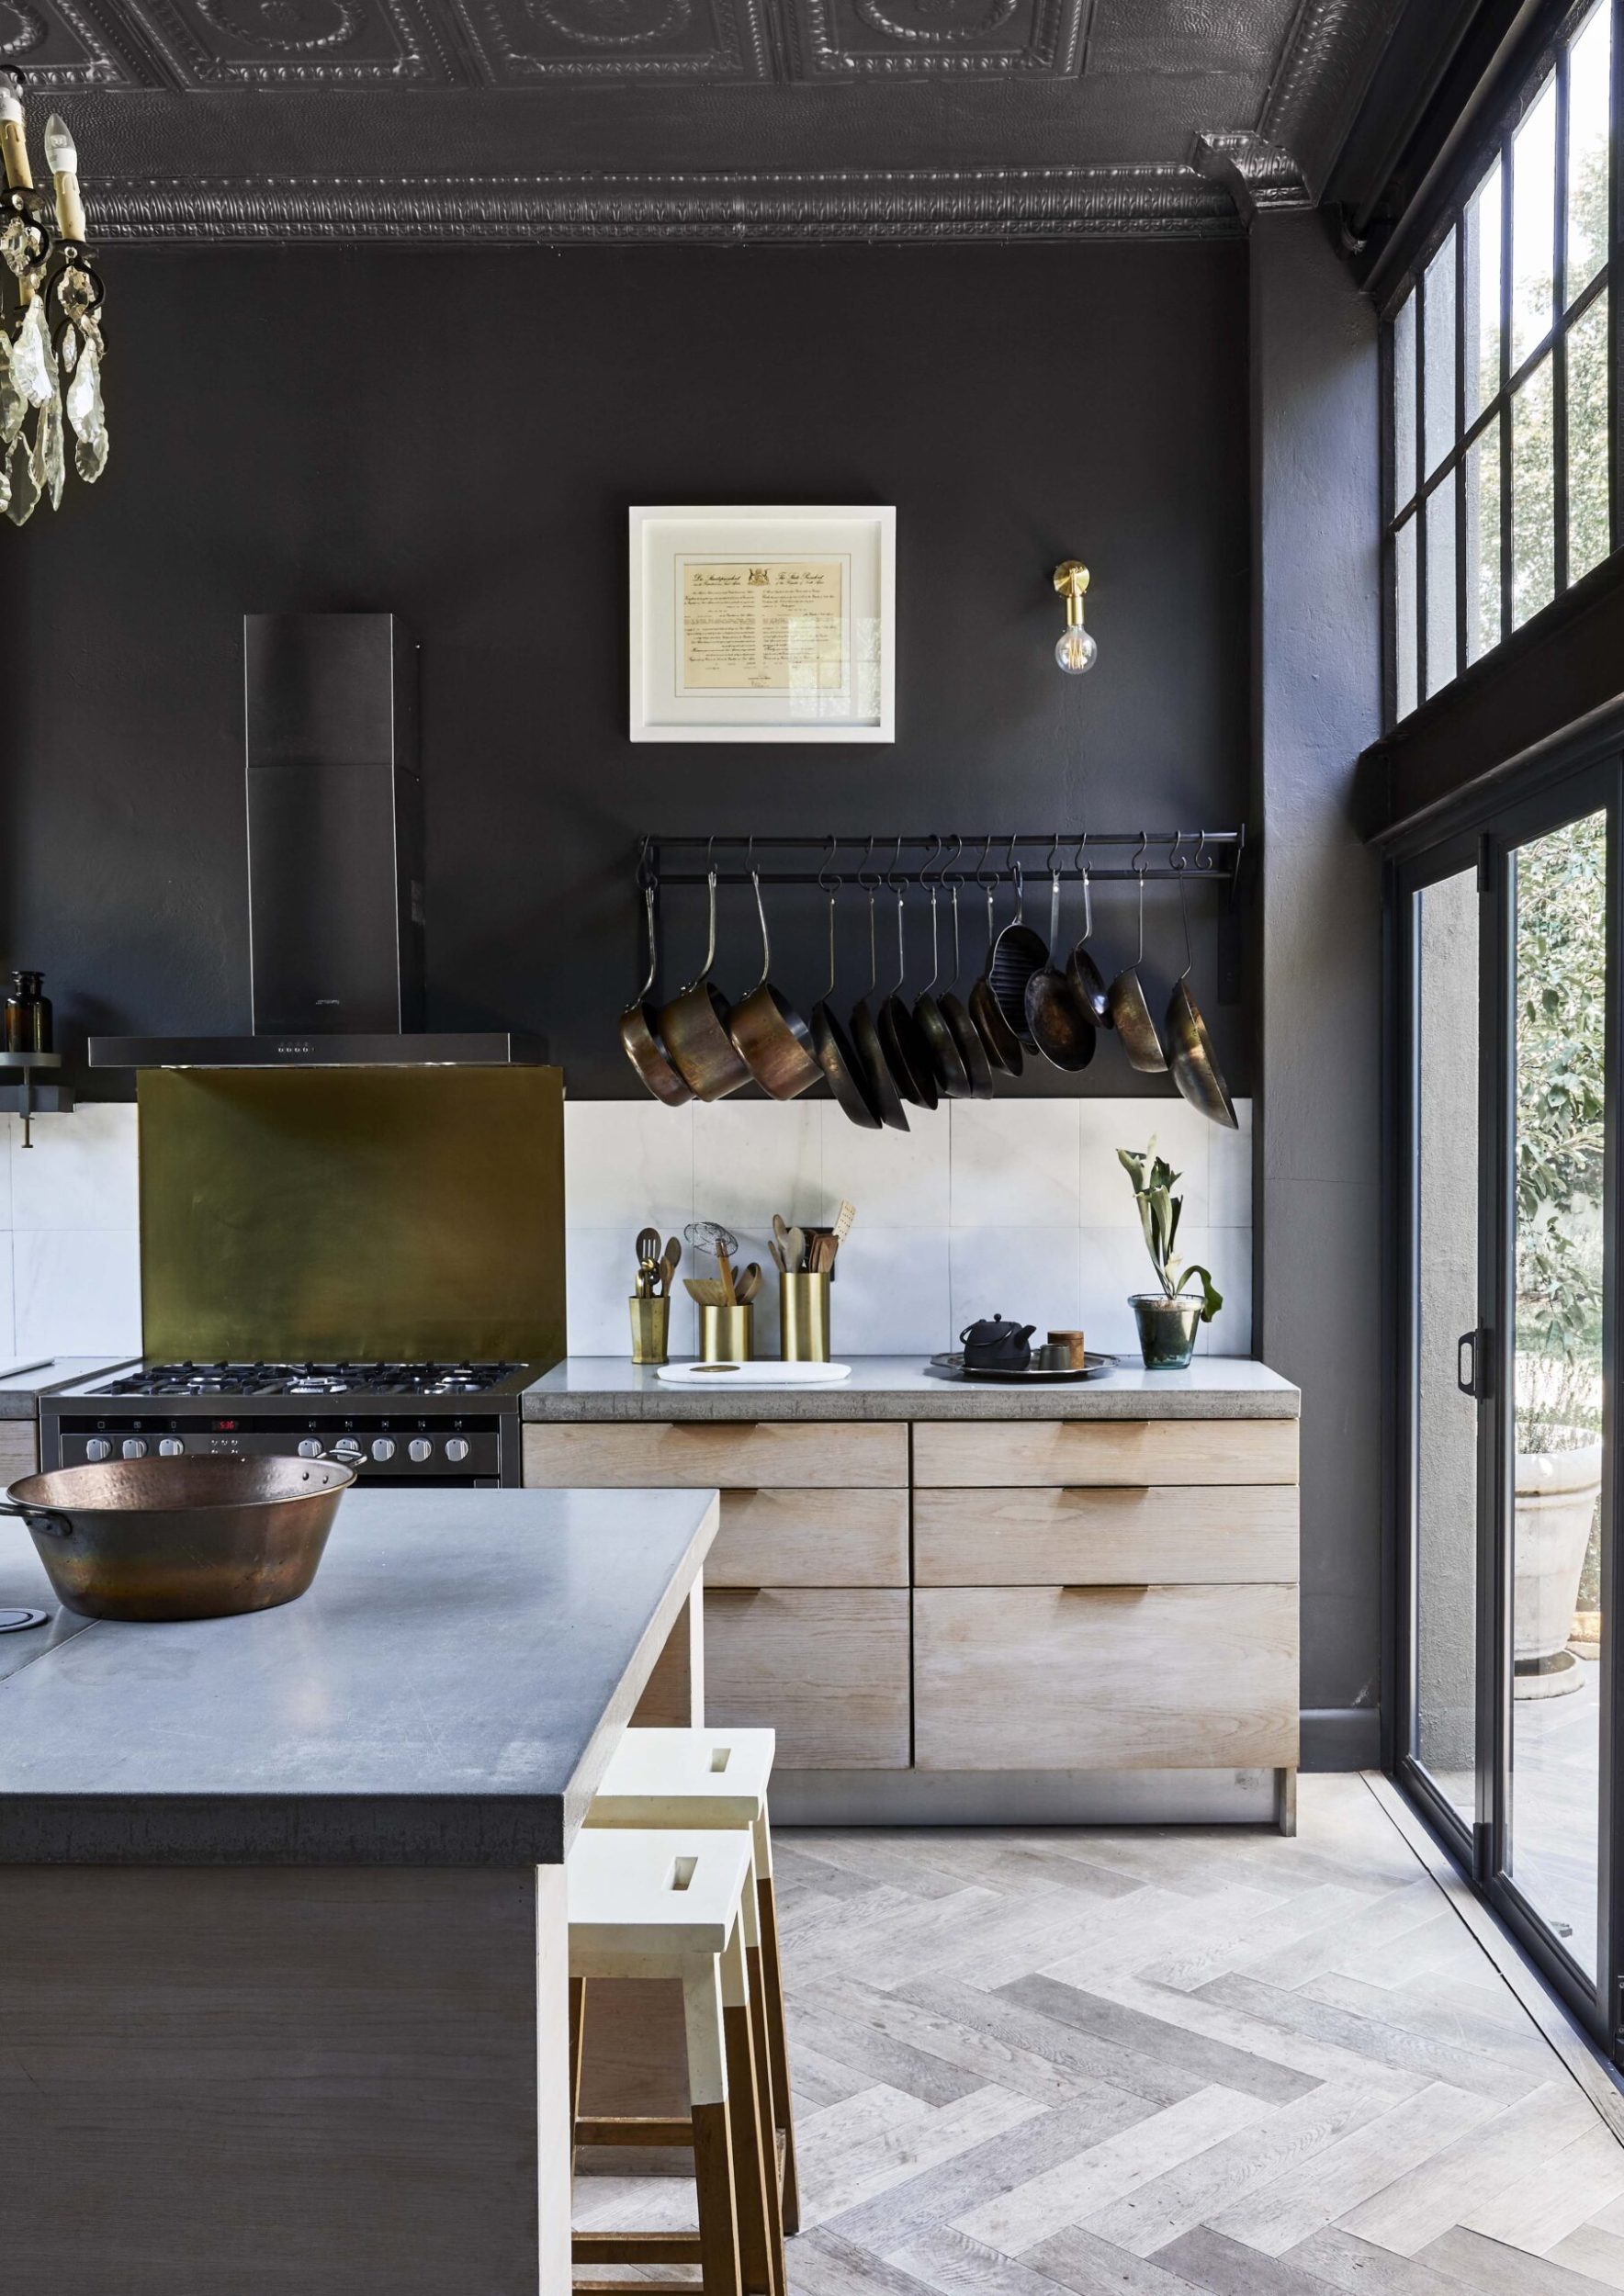 A grey tiled kitchen with wooden drawers and black walls 